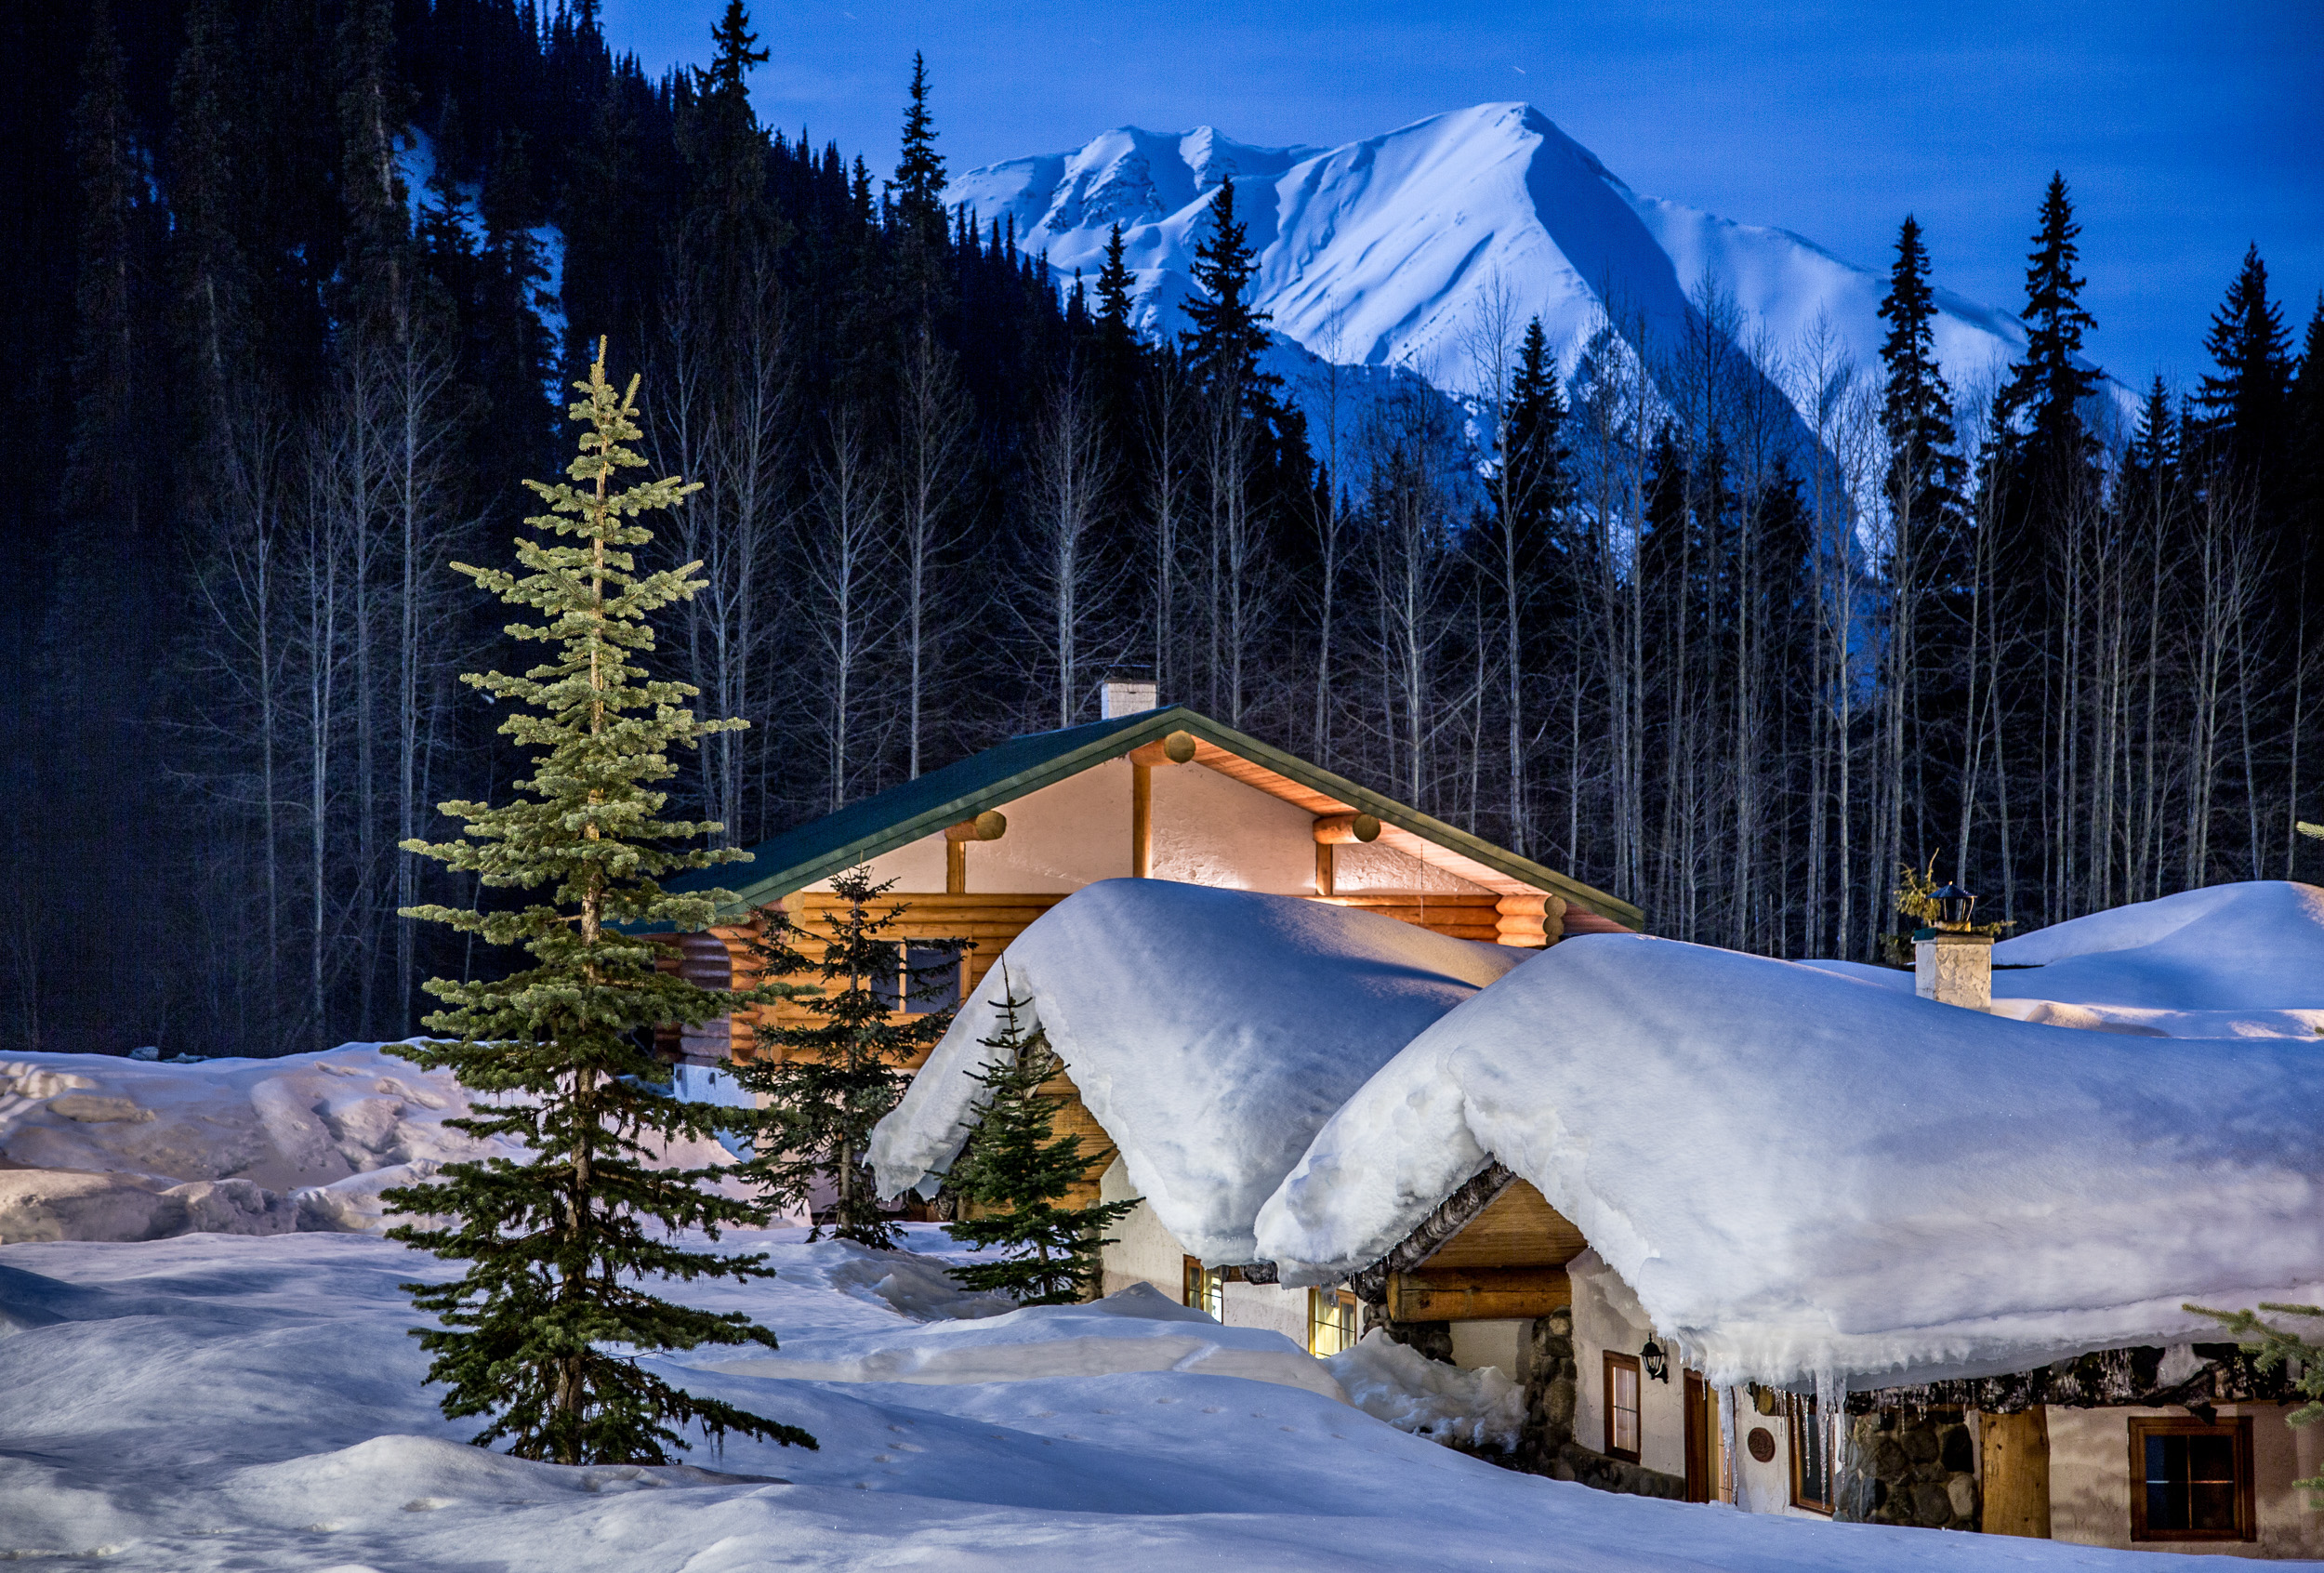 snow covered log cabins with mountains in background